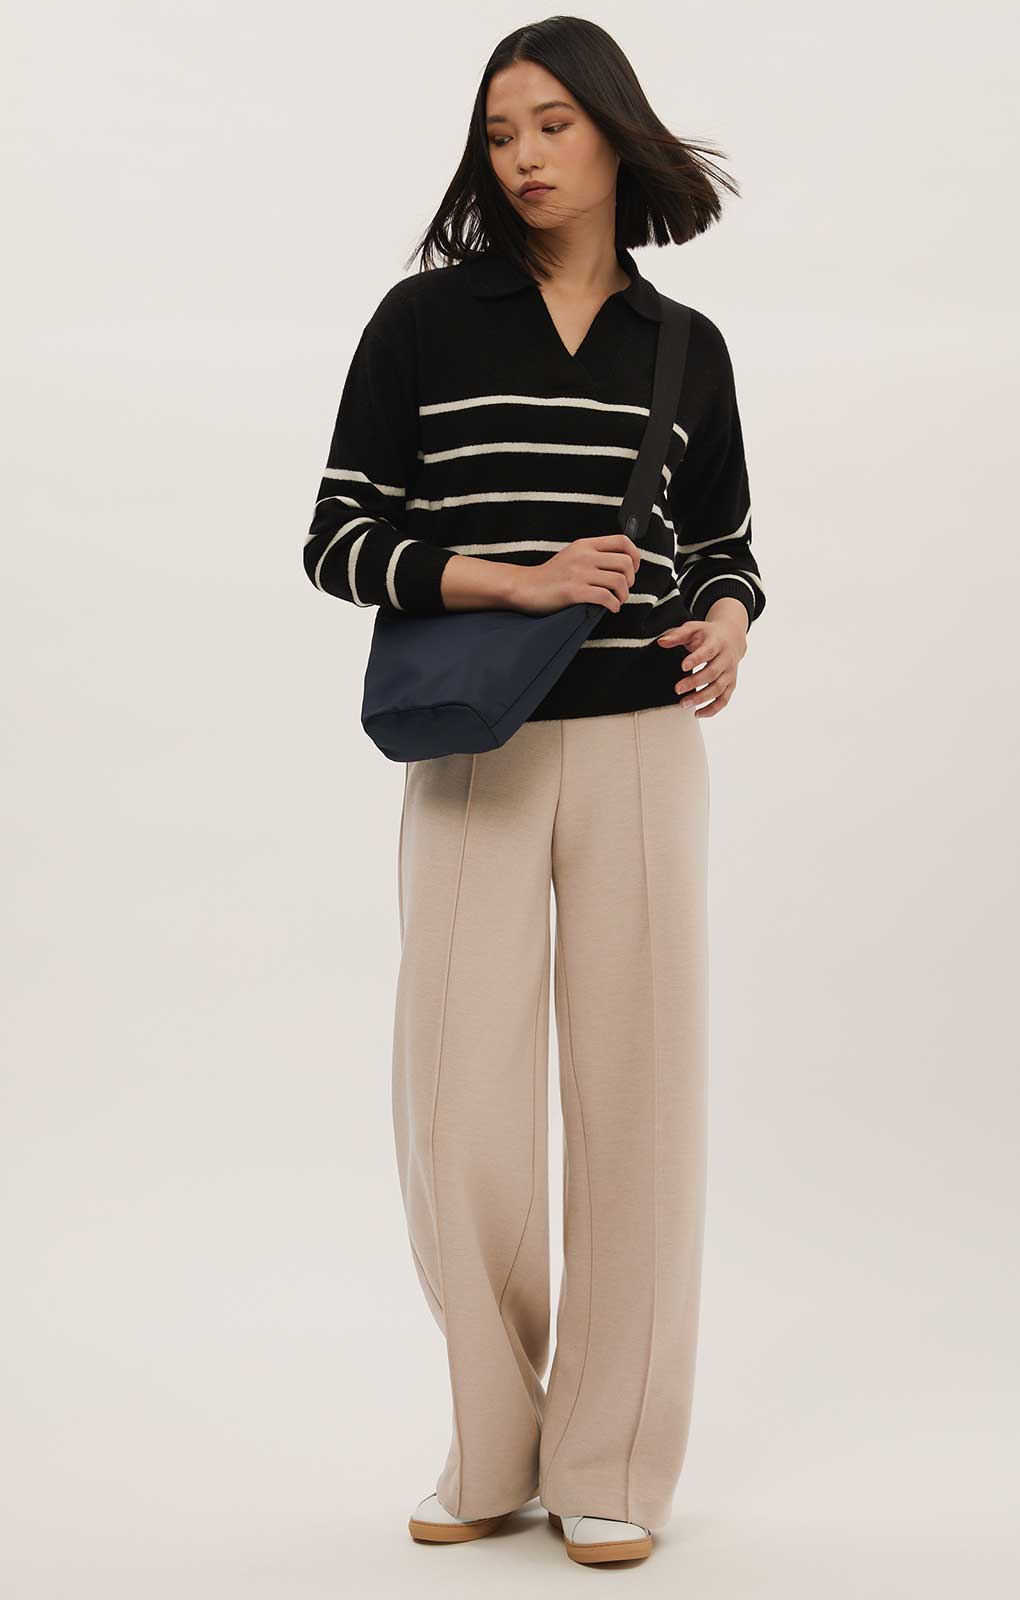 M&S Sand Jersey Textured Wide Leg Trousers product image